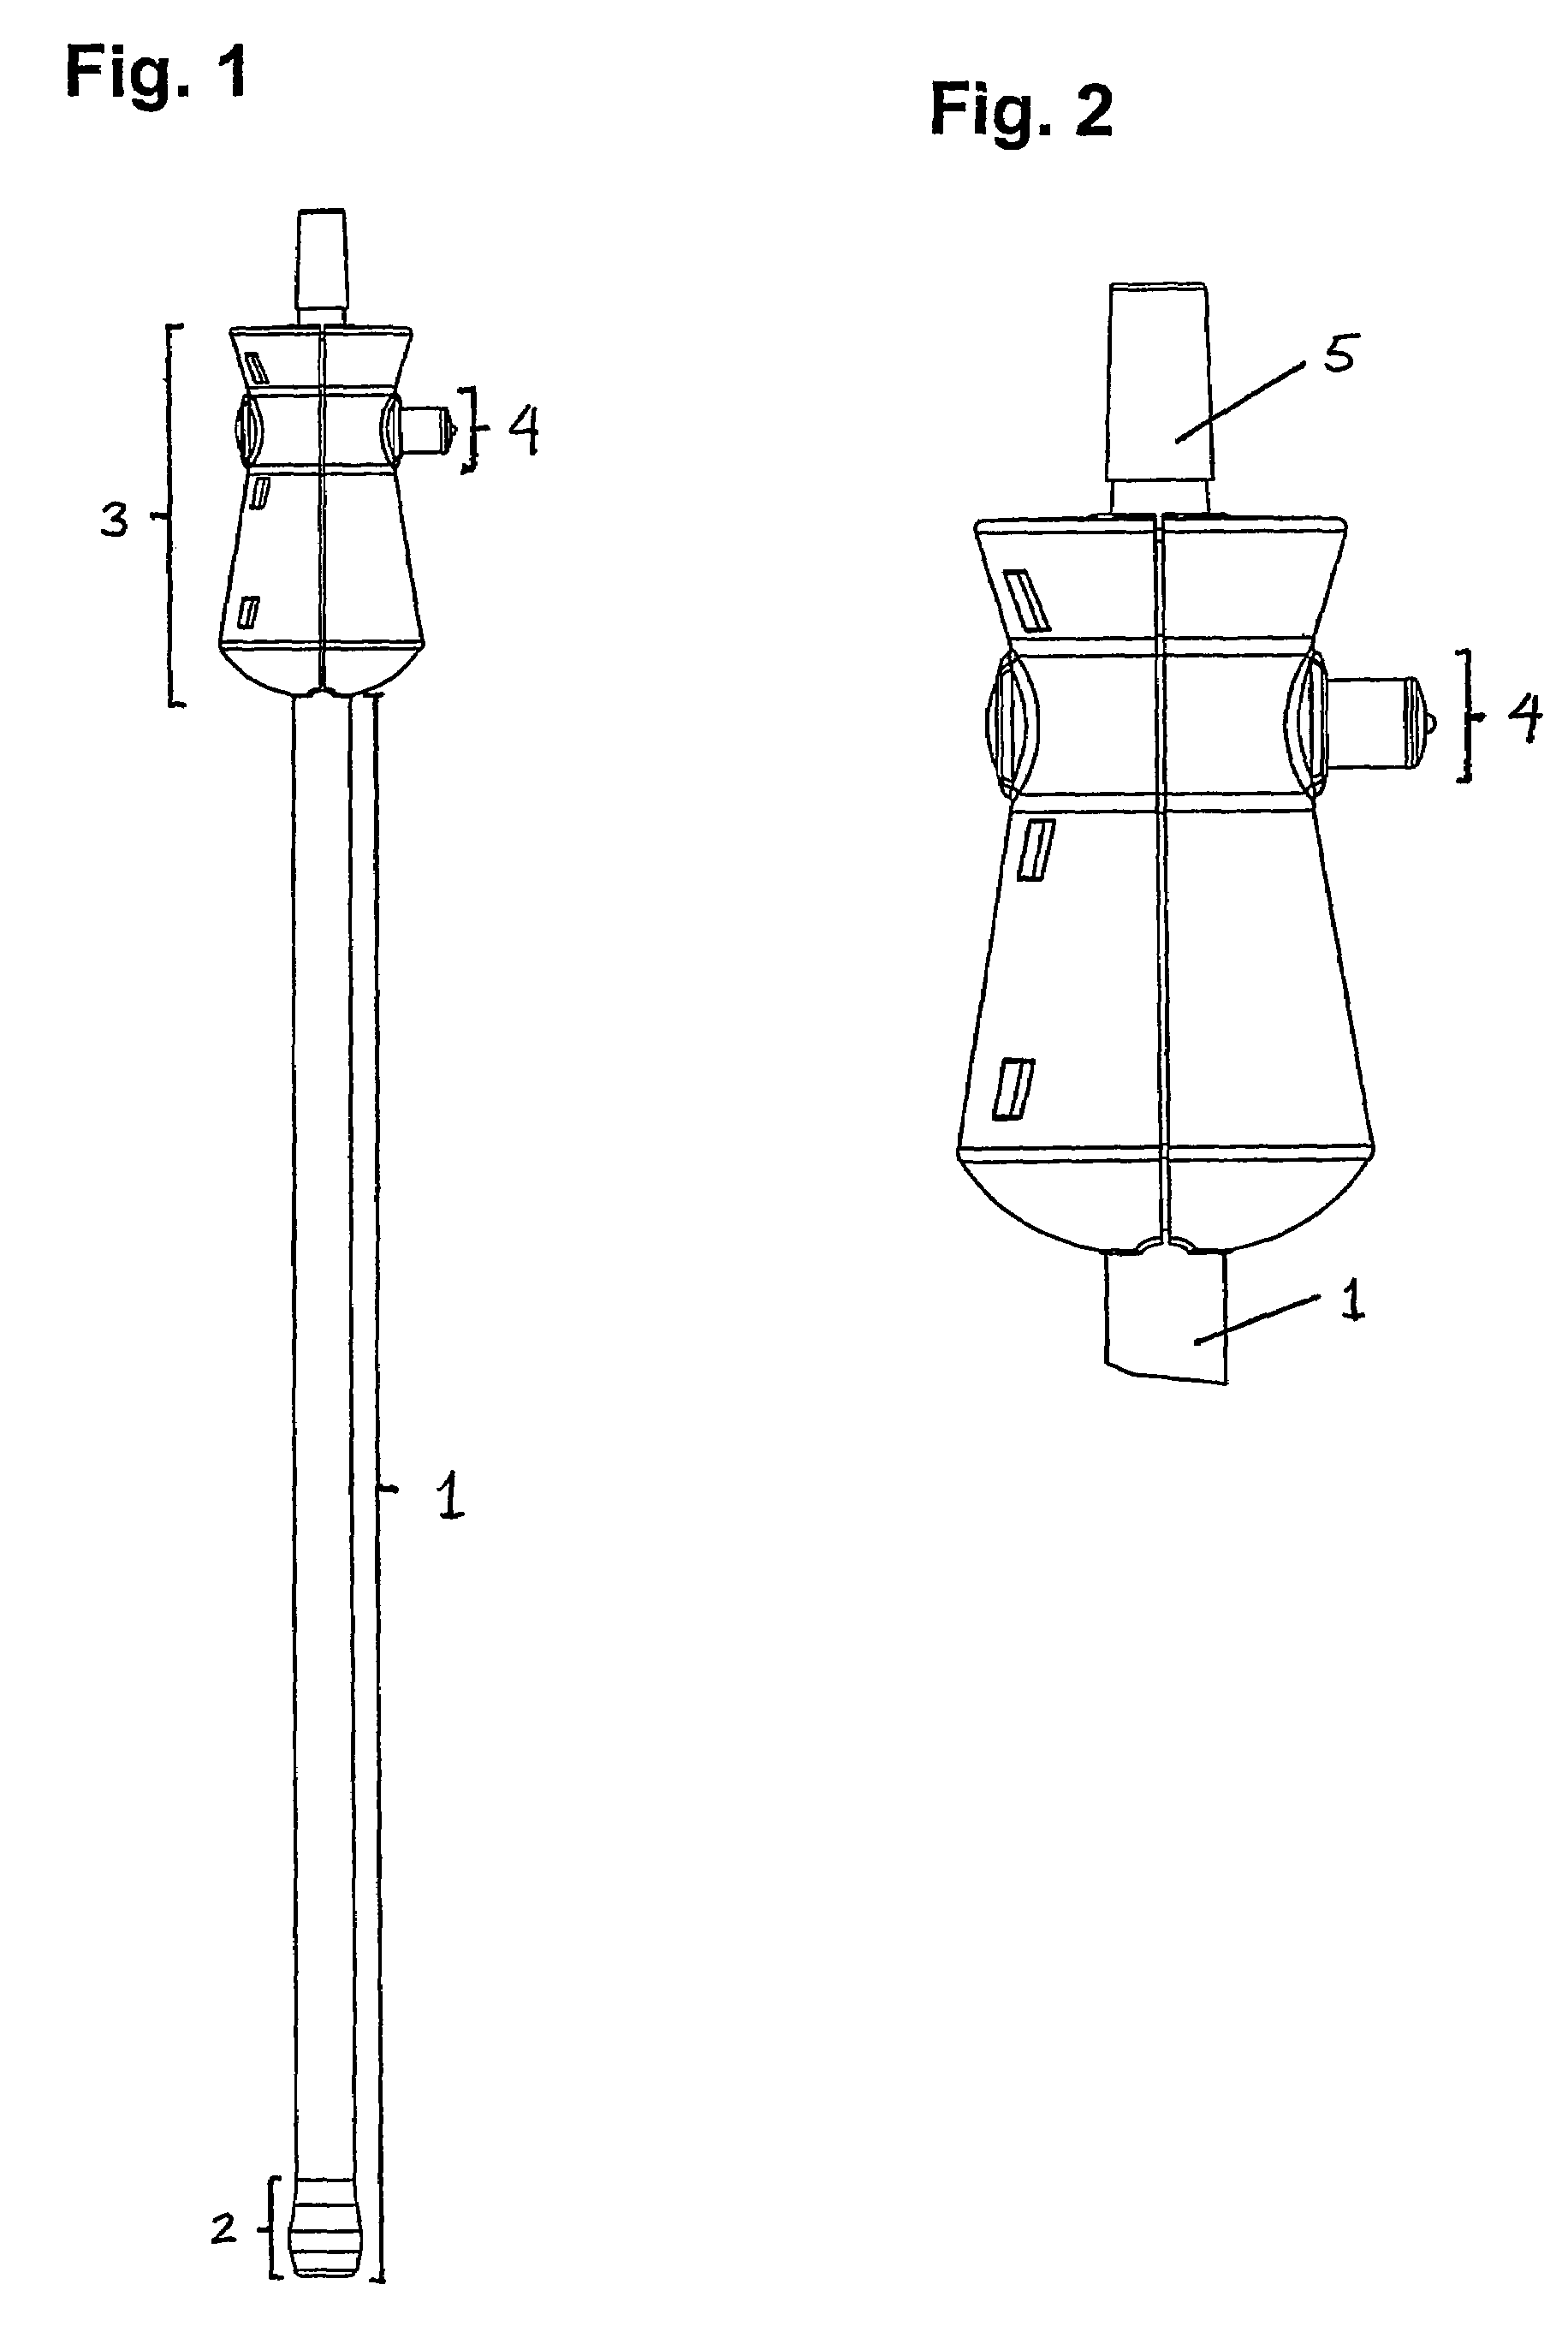 Device for administration of fluids